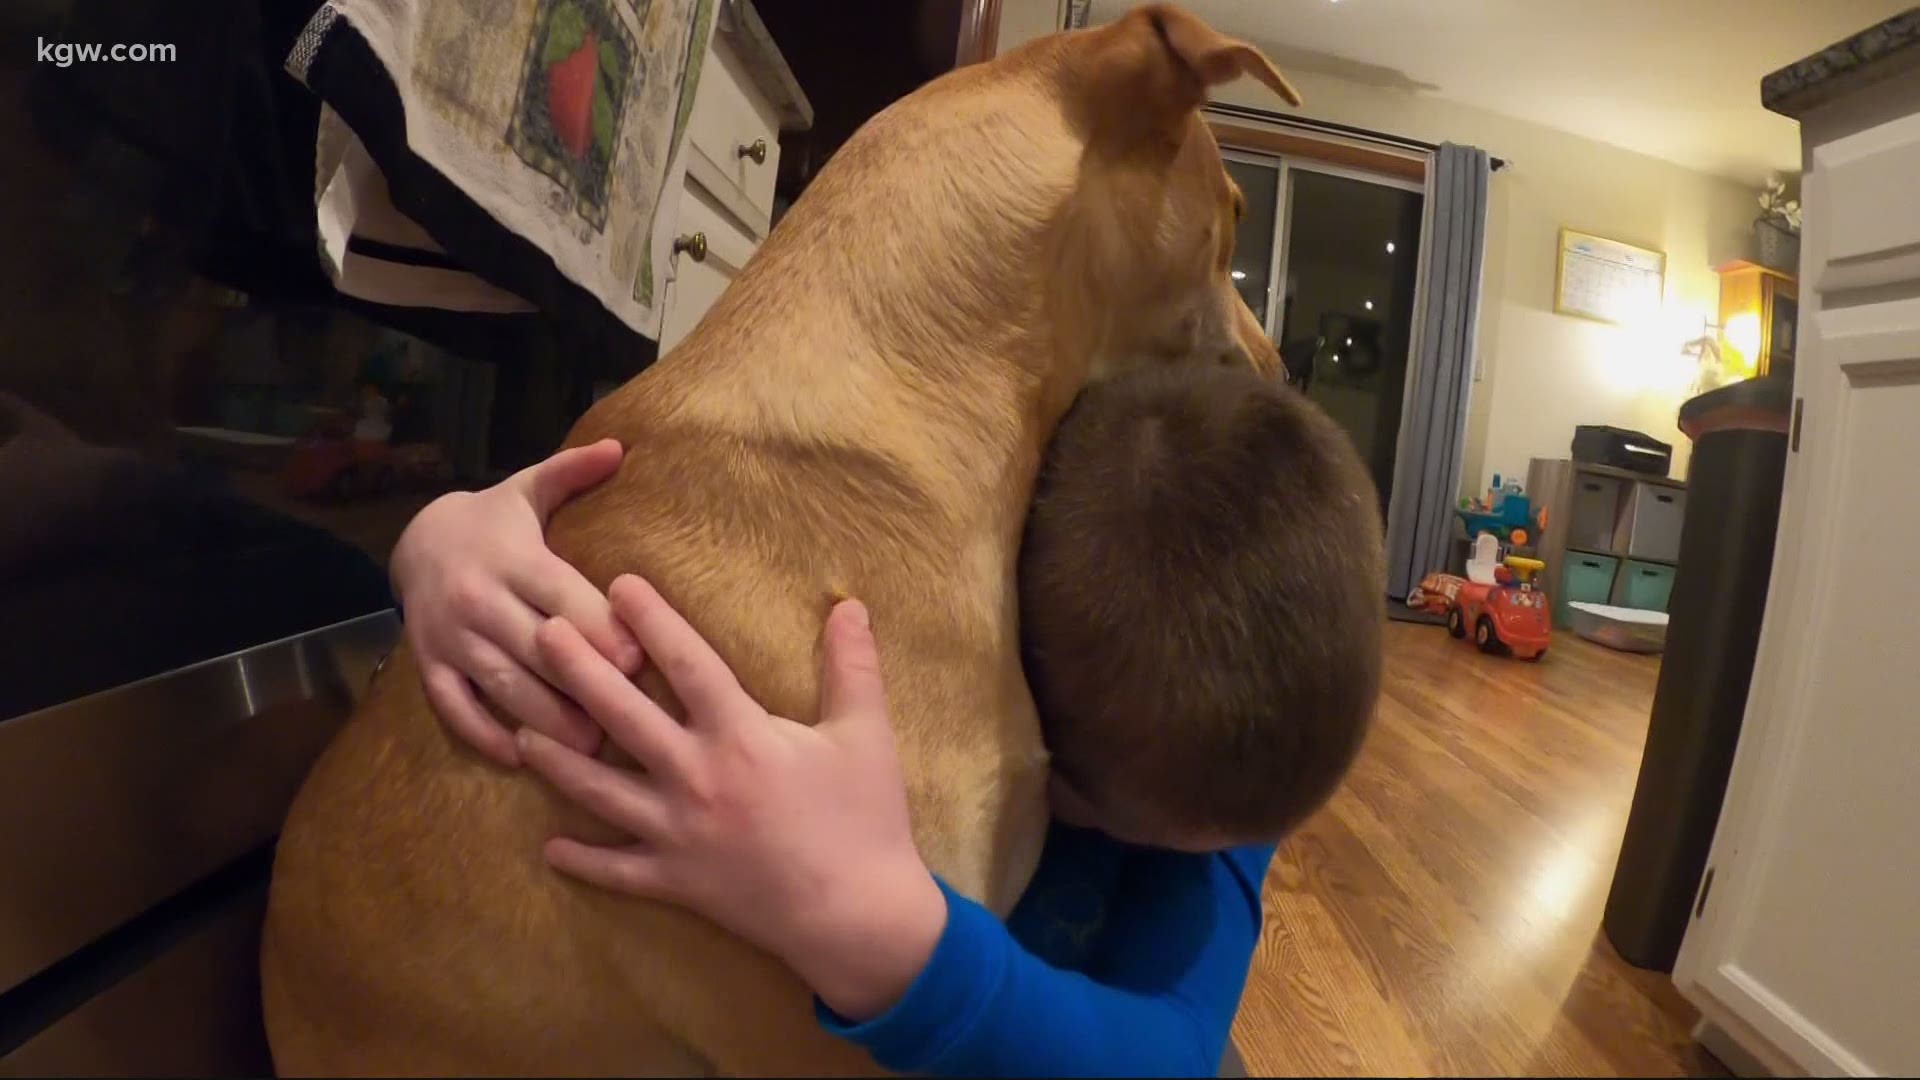 Researchers look at the bond quality between dogs and kids, when compared to dogs and adults.